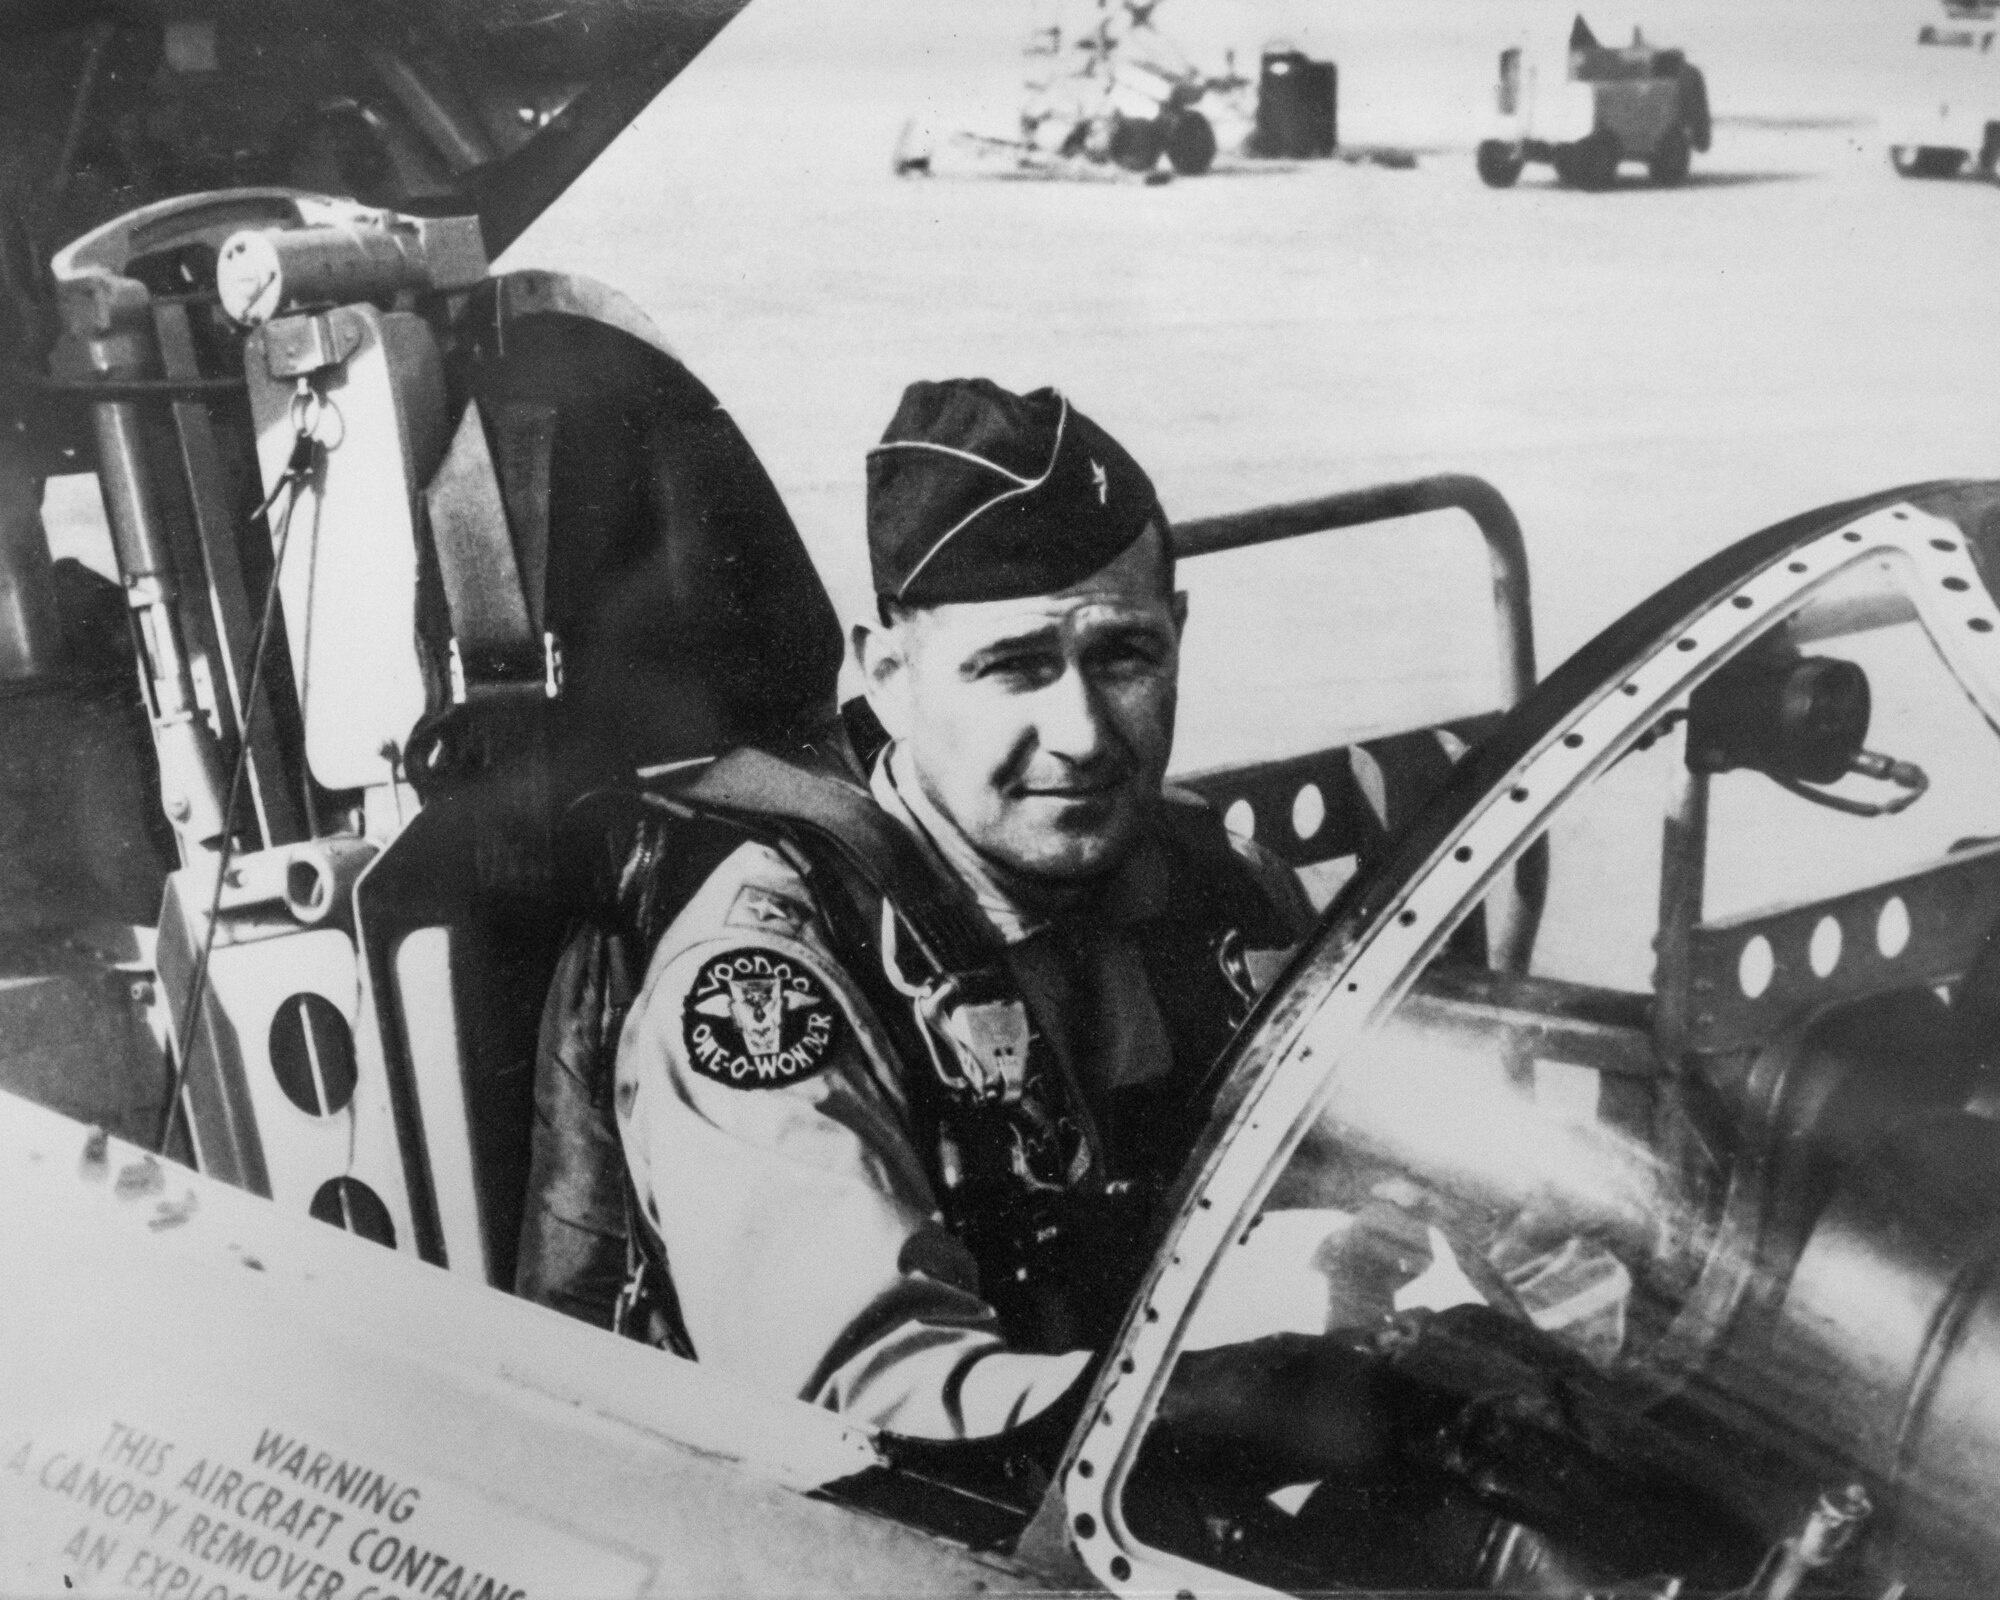 U.S. Air Force Brig. Gen. Jack Henry Owen served in the Kentucky Air National Guard for more than 24 years after his time as a prisoner of war during World War II. He is shown in the cockpit of a Kentucky Air National Guard RF-101 Voodoo aircraft in the late 1960s or early 1970s.